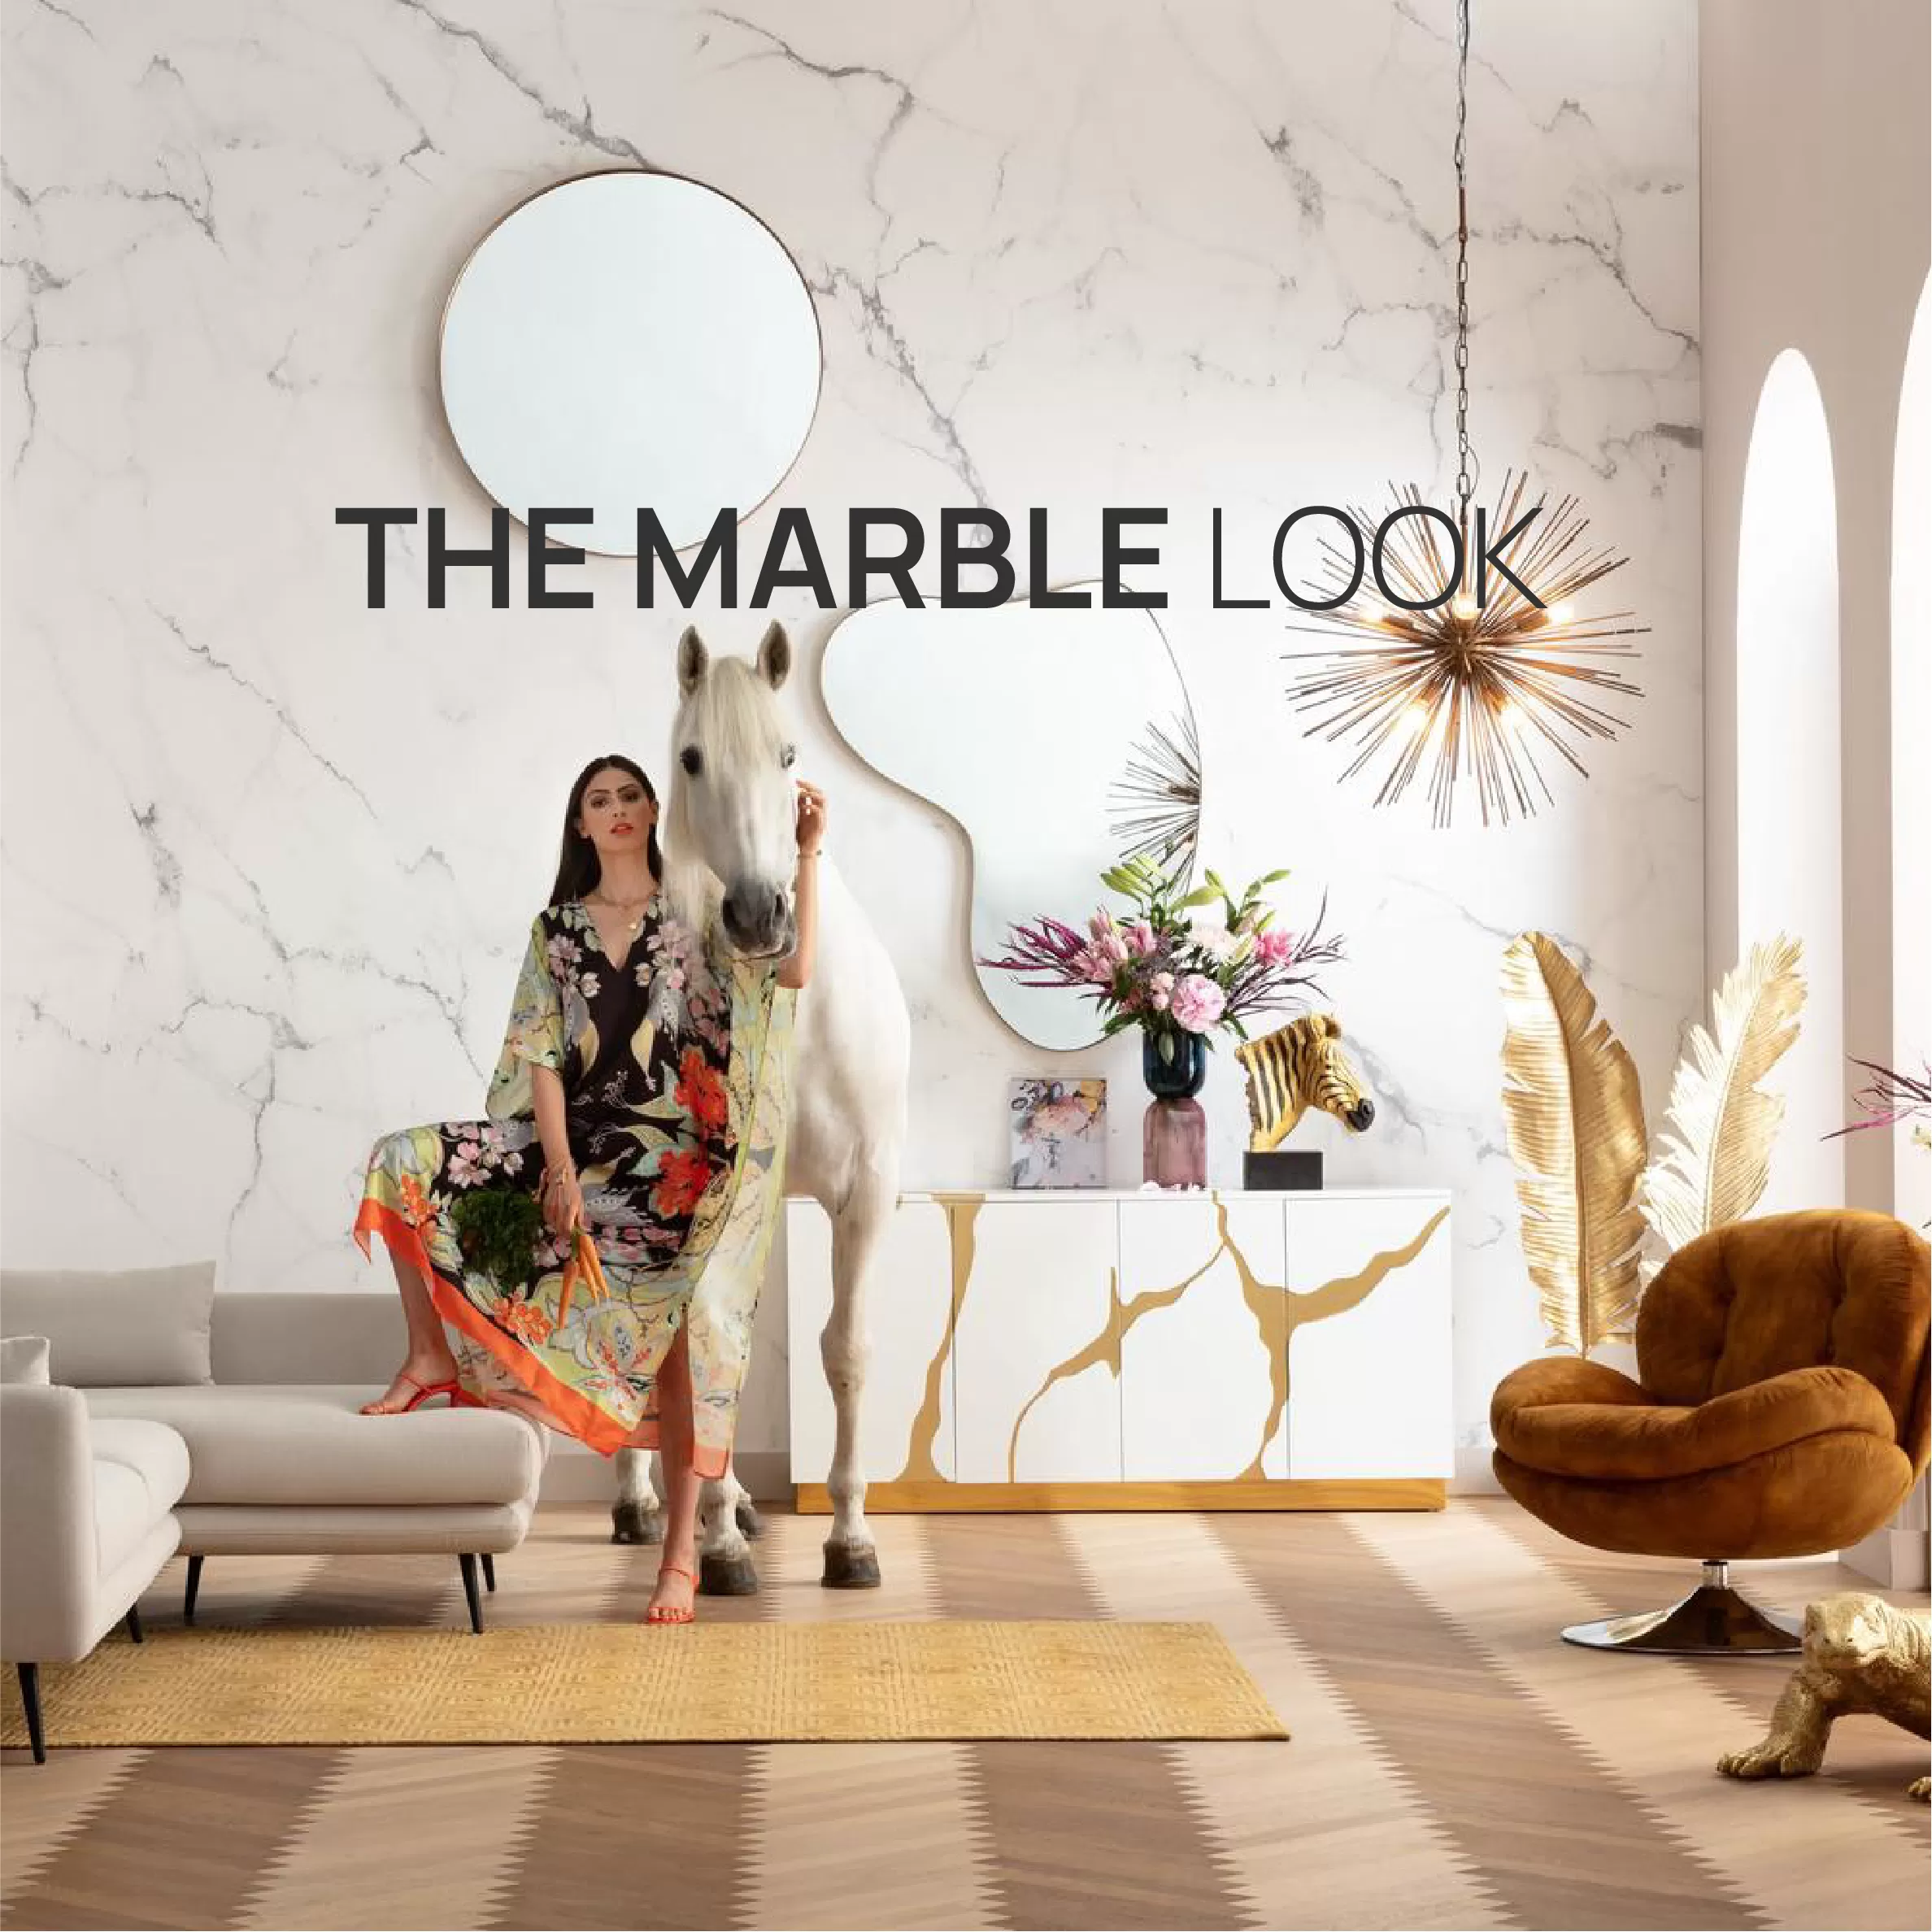 The marble look collection